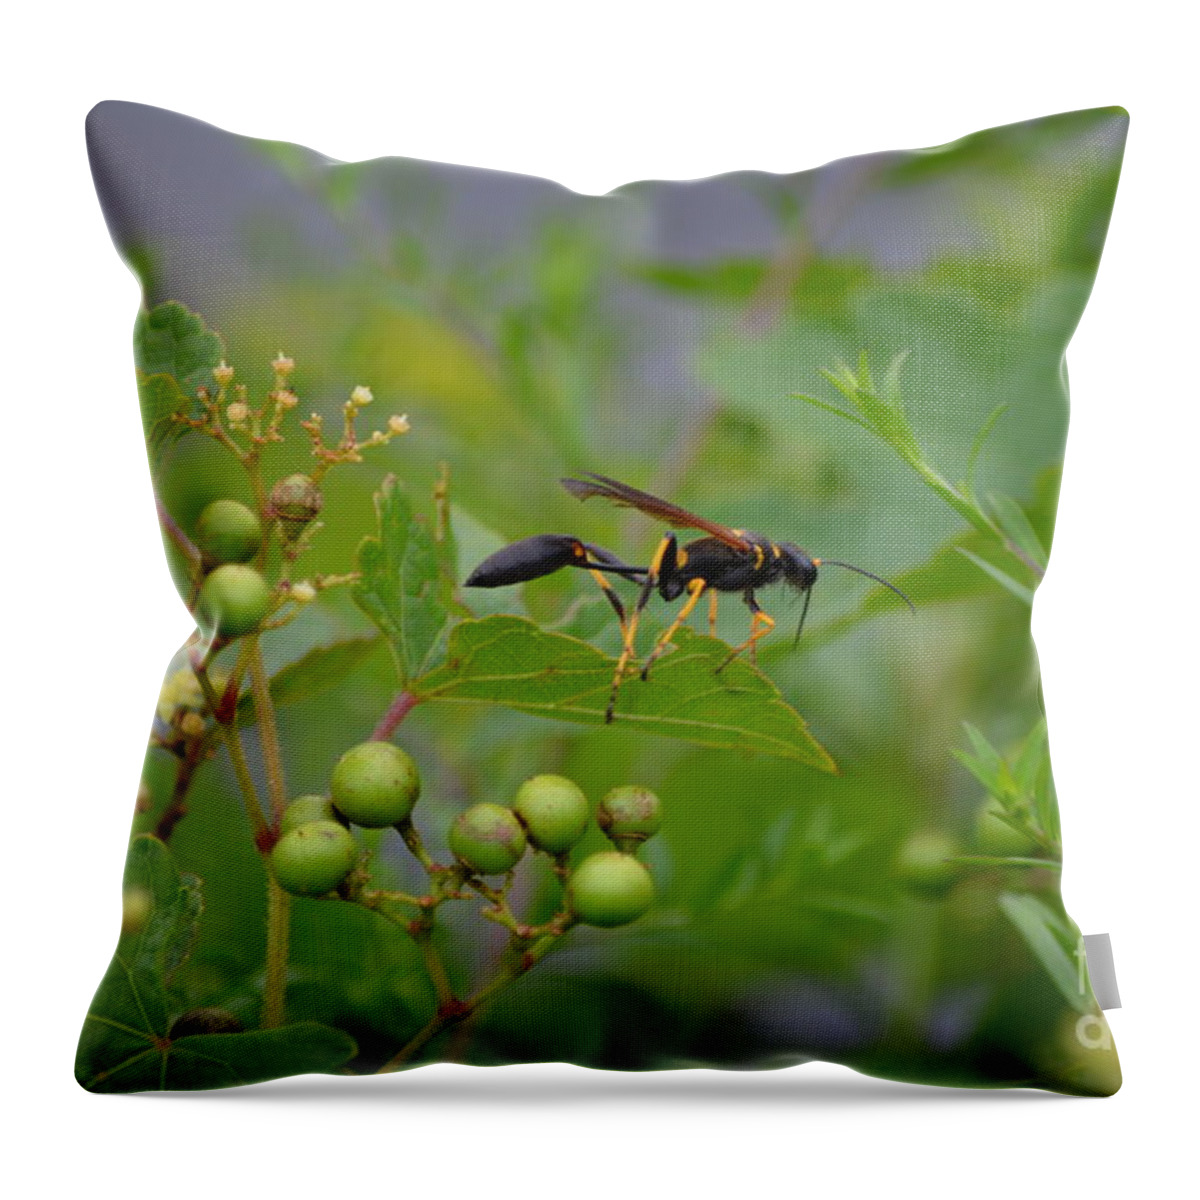 Insect Throw Pillow featuring the photograph Thread-waist Wasp by James Petersen